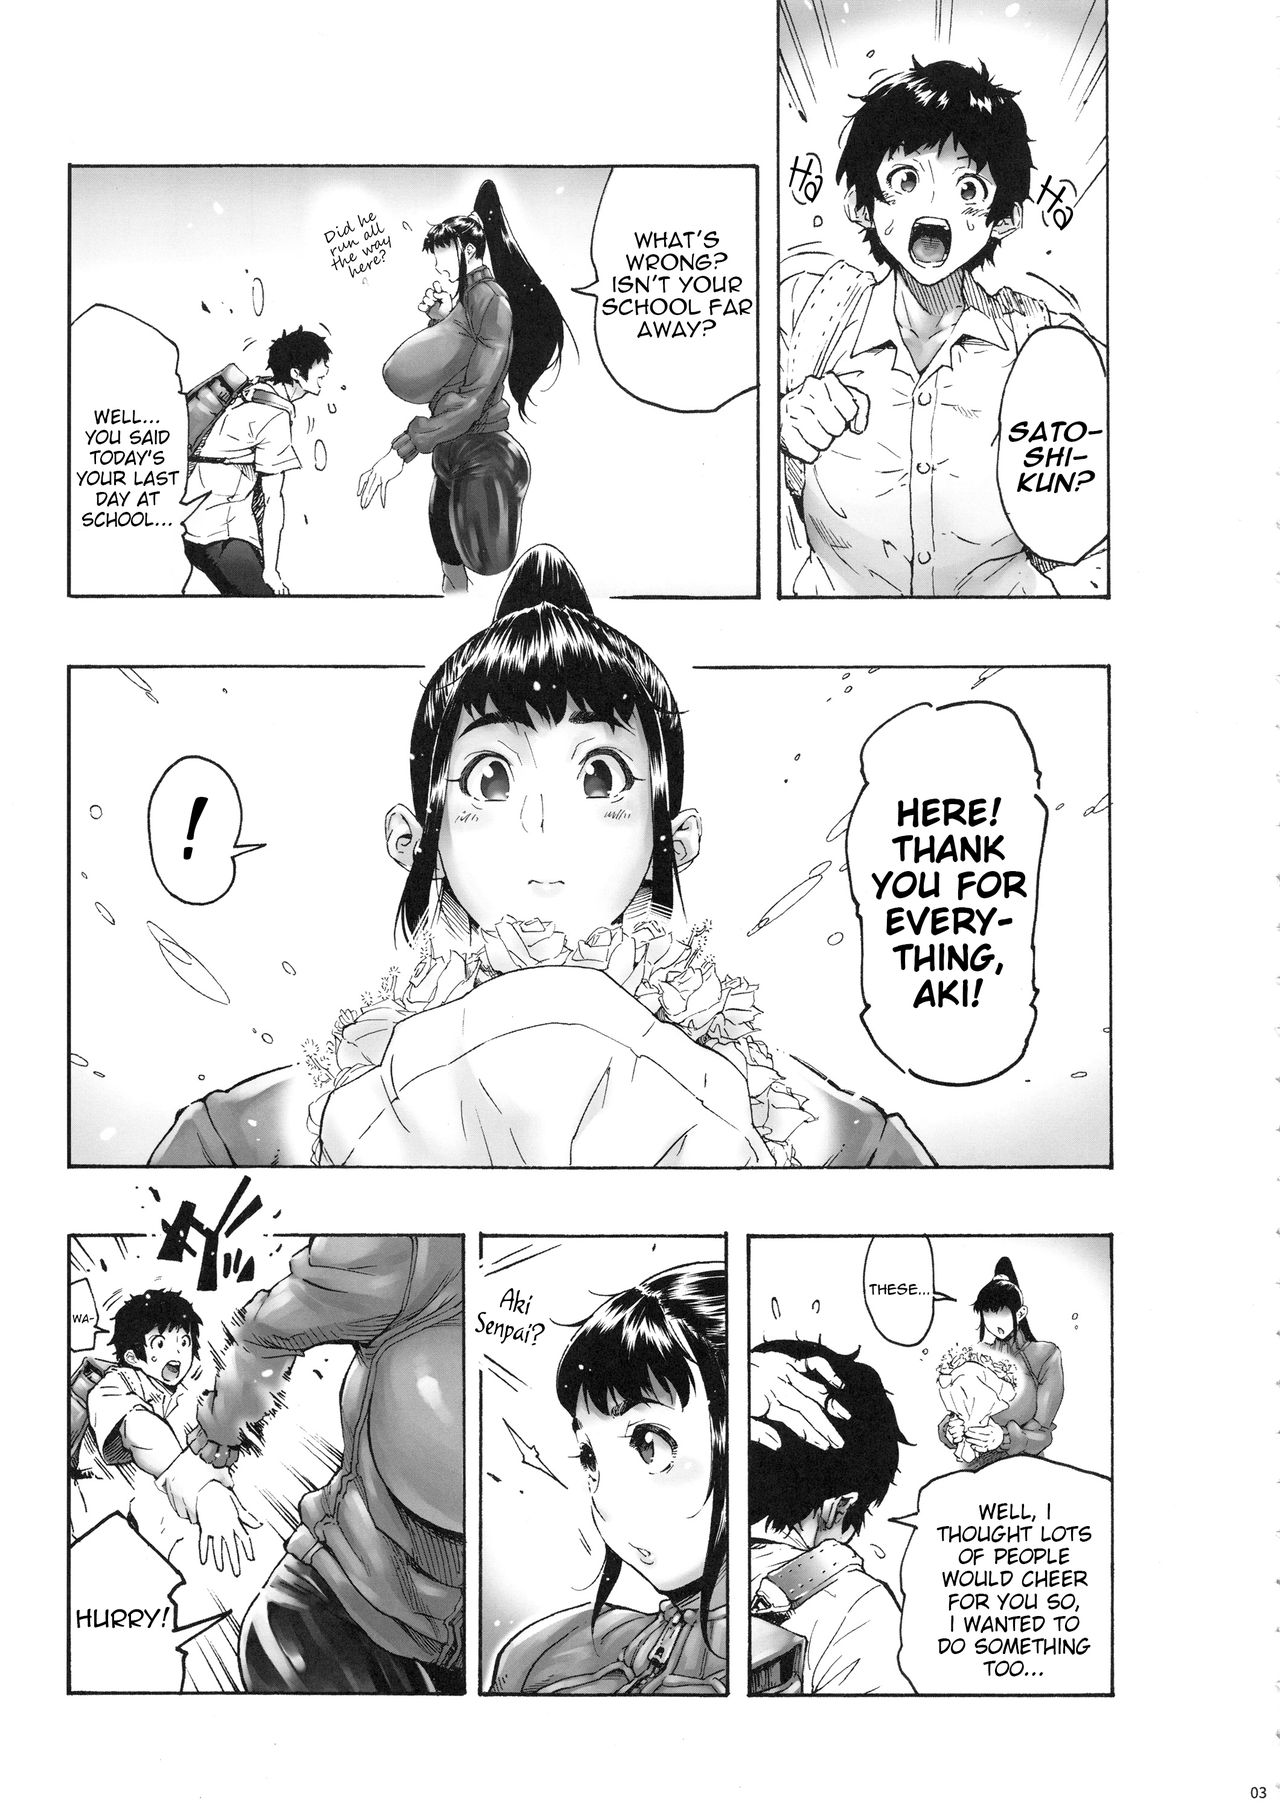 [Coochy-Coo (Bonten)] My Childhood friend is a JK Ponytailed Girl | With Aki-Nee 2 | AkiAss 3 | Trilogy [English] {Stopittarpit} page 48 full